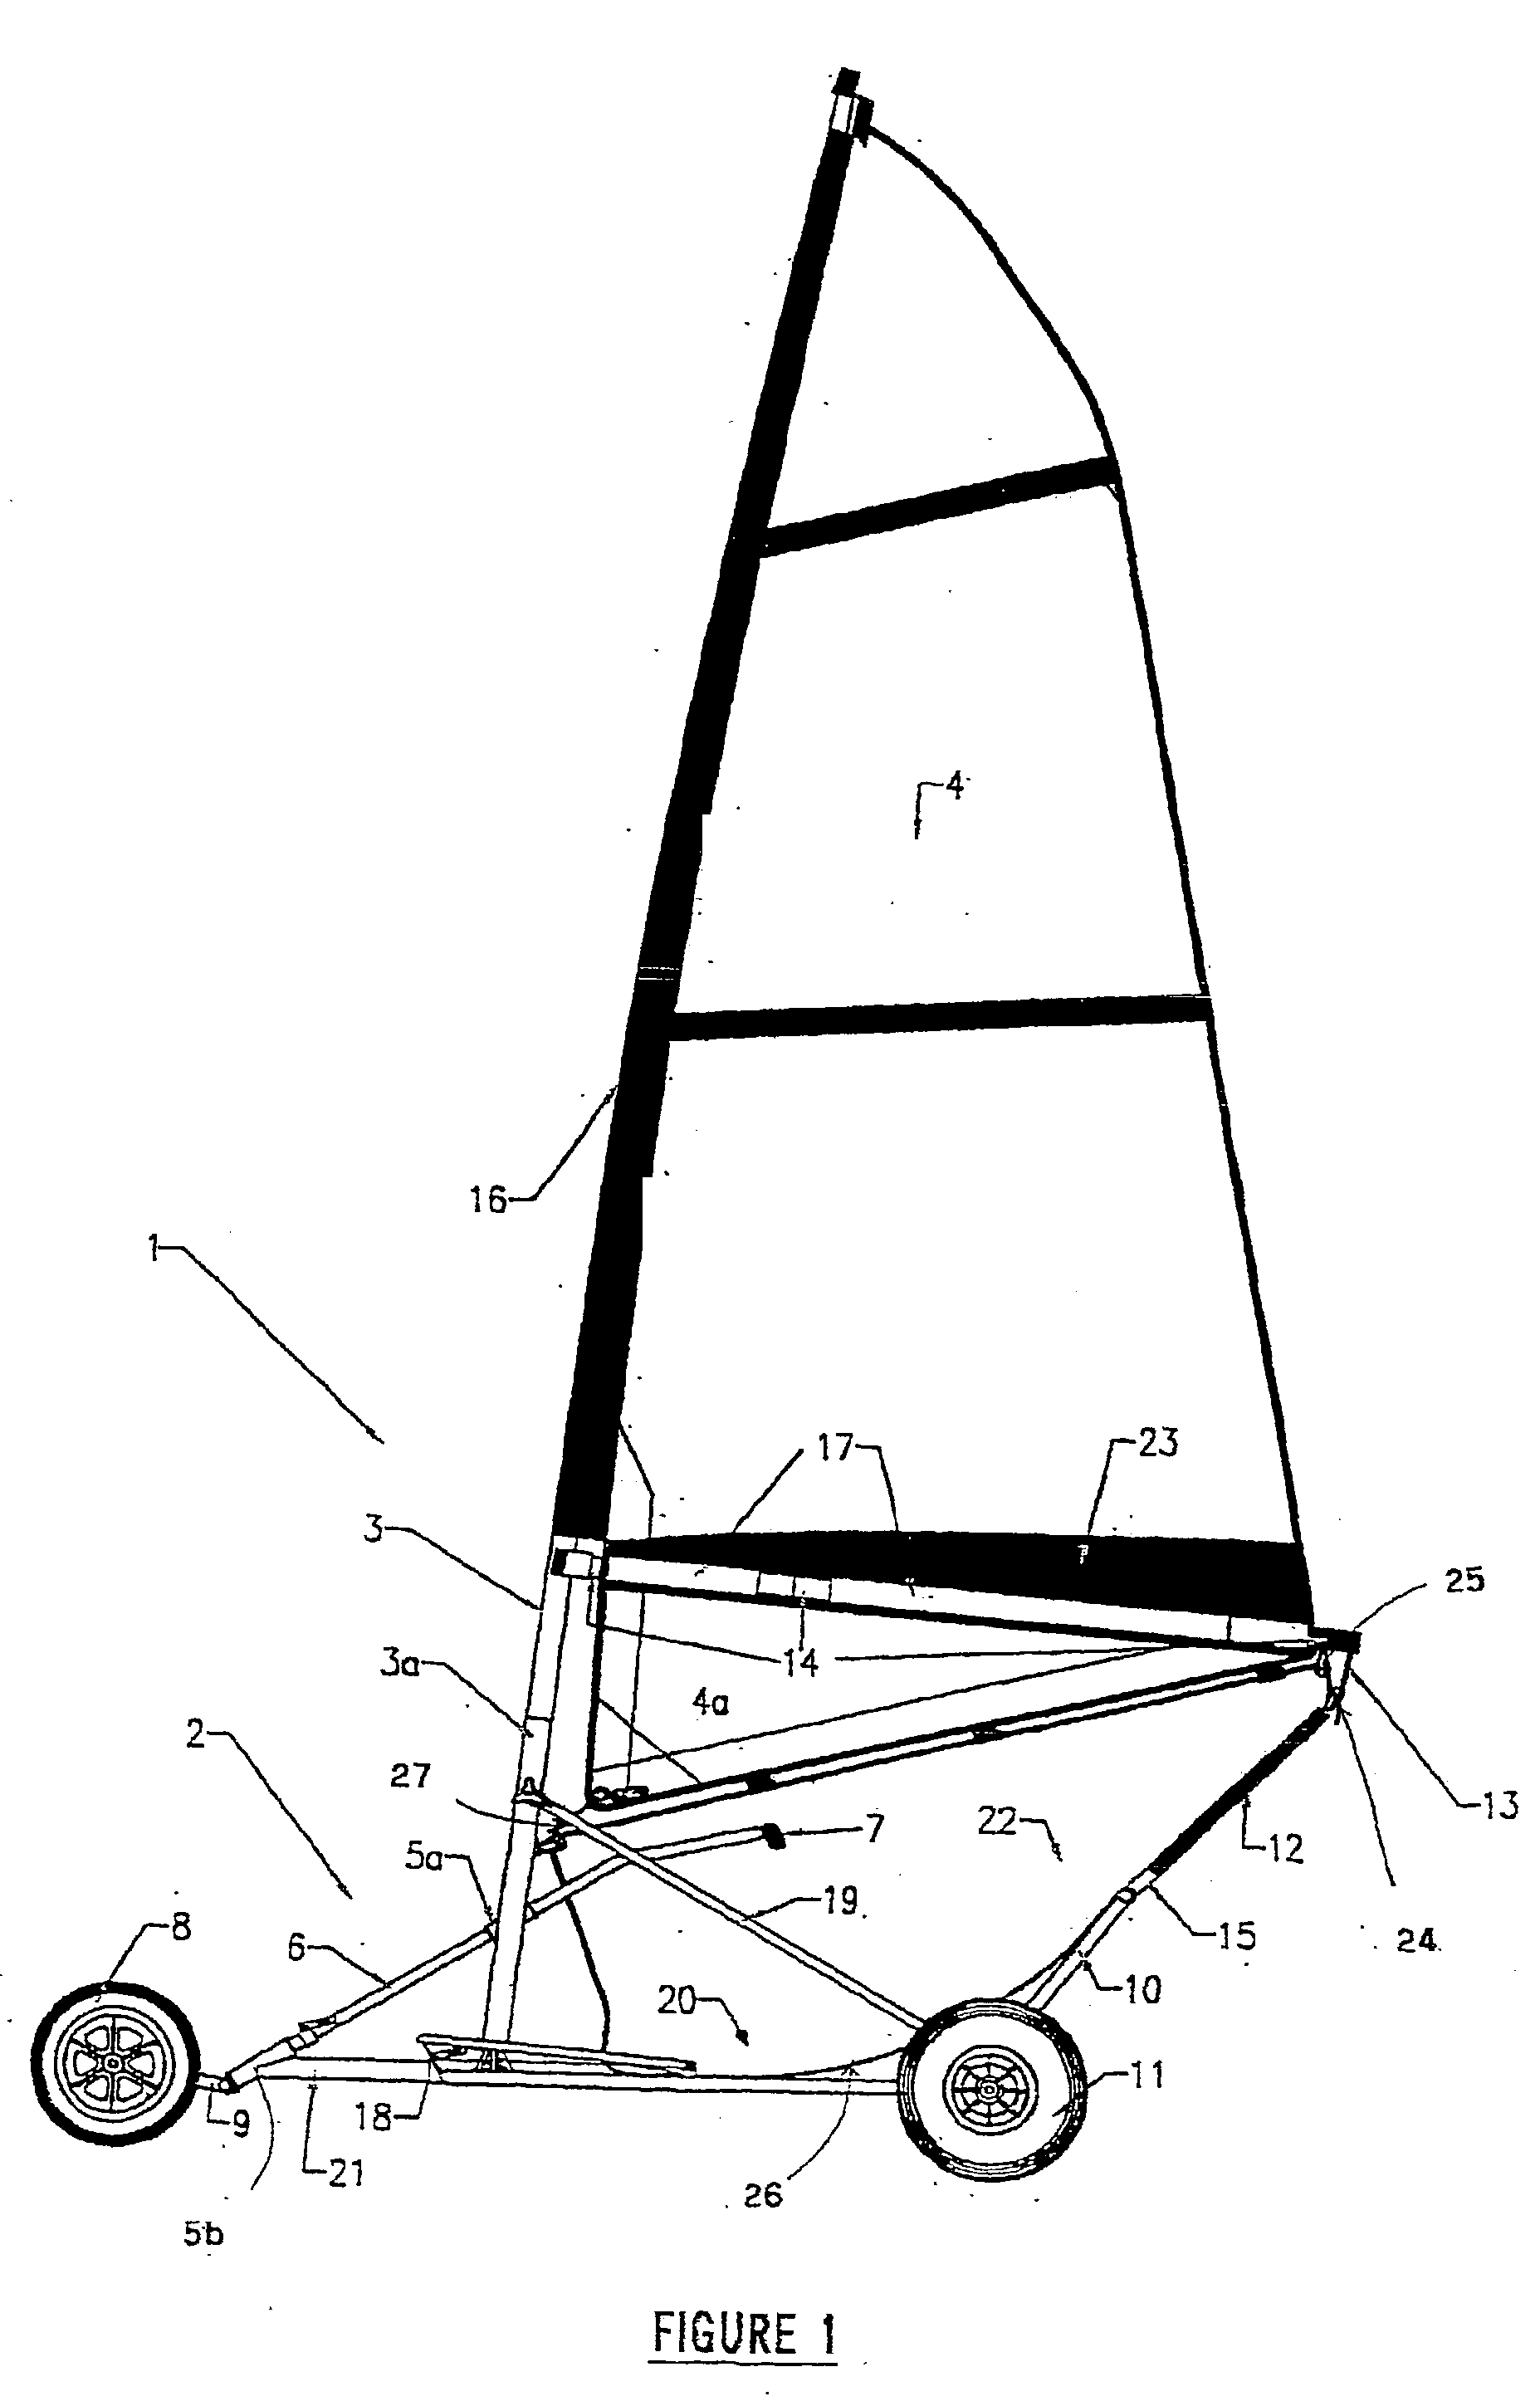 Mounting system, sail, steering mechainism and frame for a landsailer